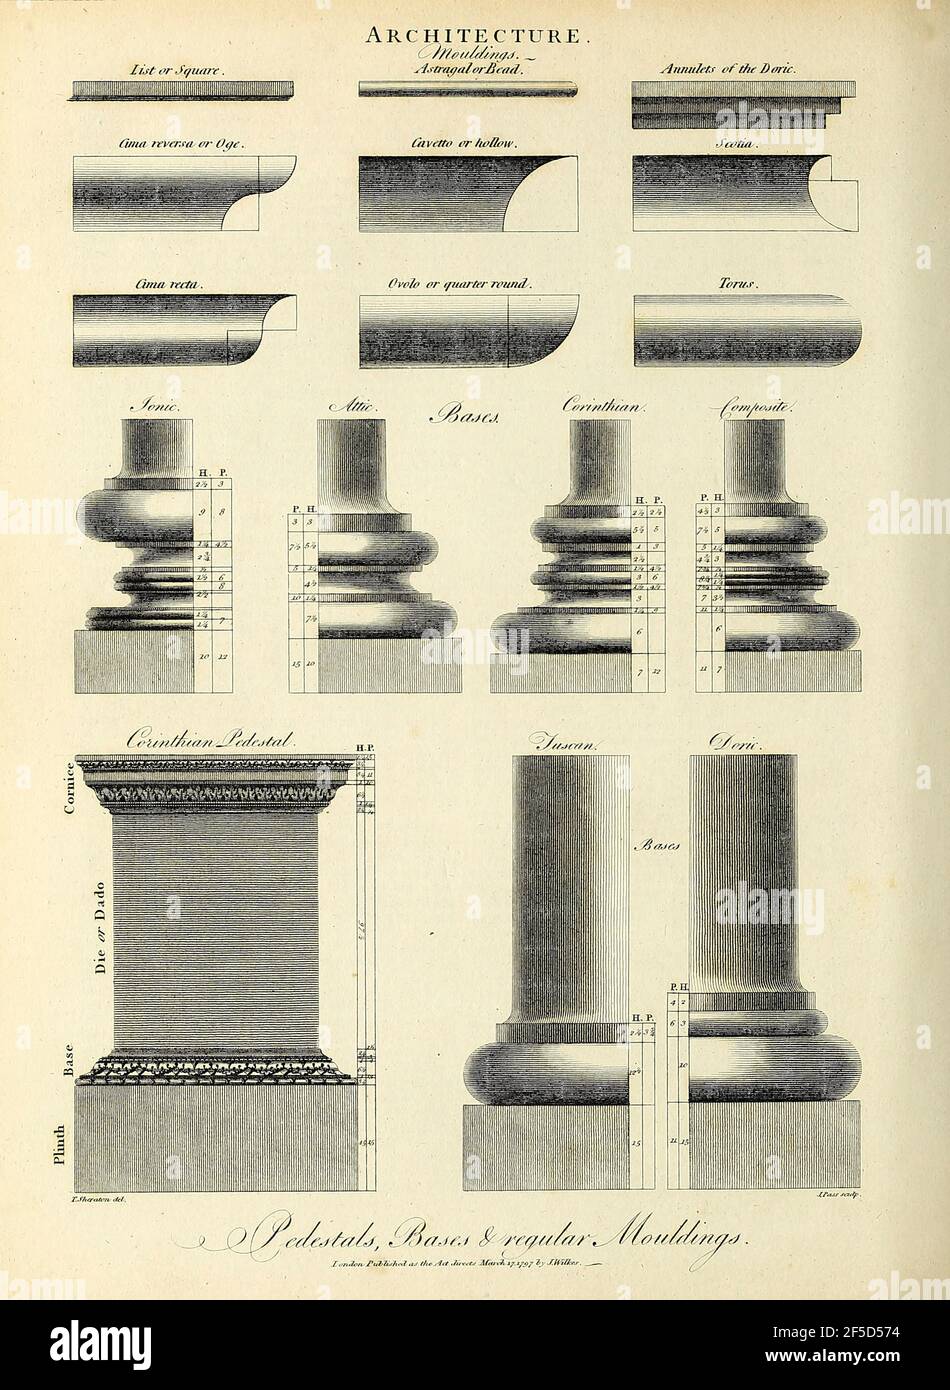 Pedestals, Bases and Regular Mouldings Copperplate engraving From the Encyclopaedia Londinensis or, Universal dictionary of arts, sciences, and literature; Volume II;  Edited by Wilkes, John. Published in London in 1810 Stock Photo